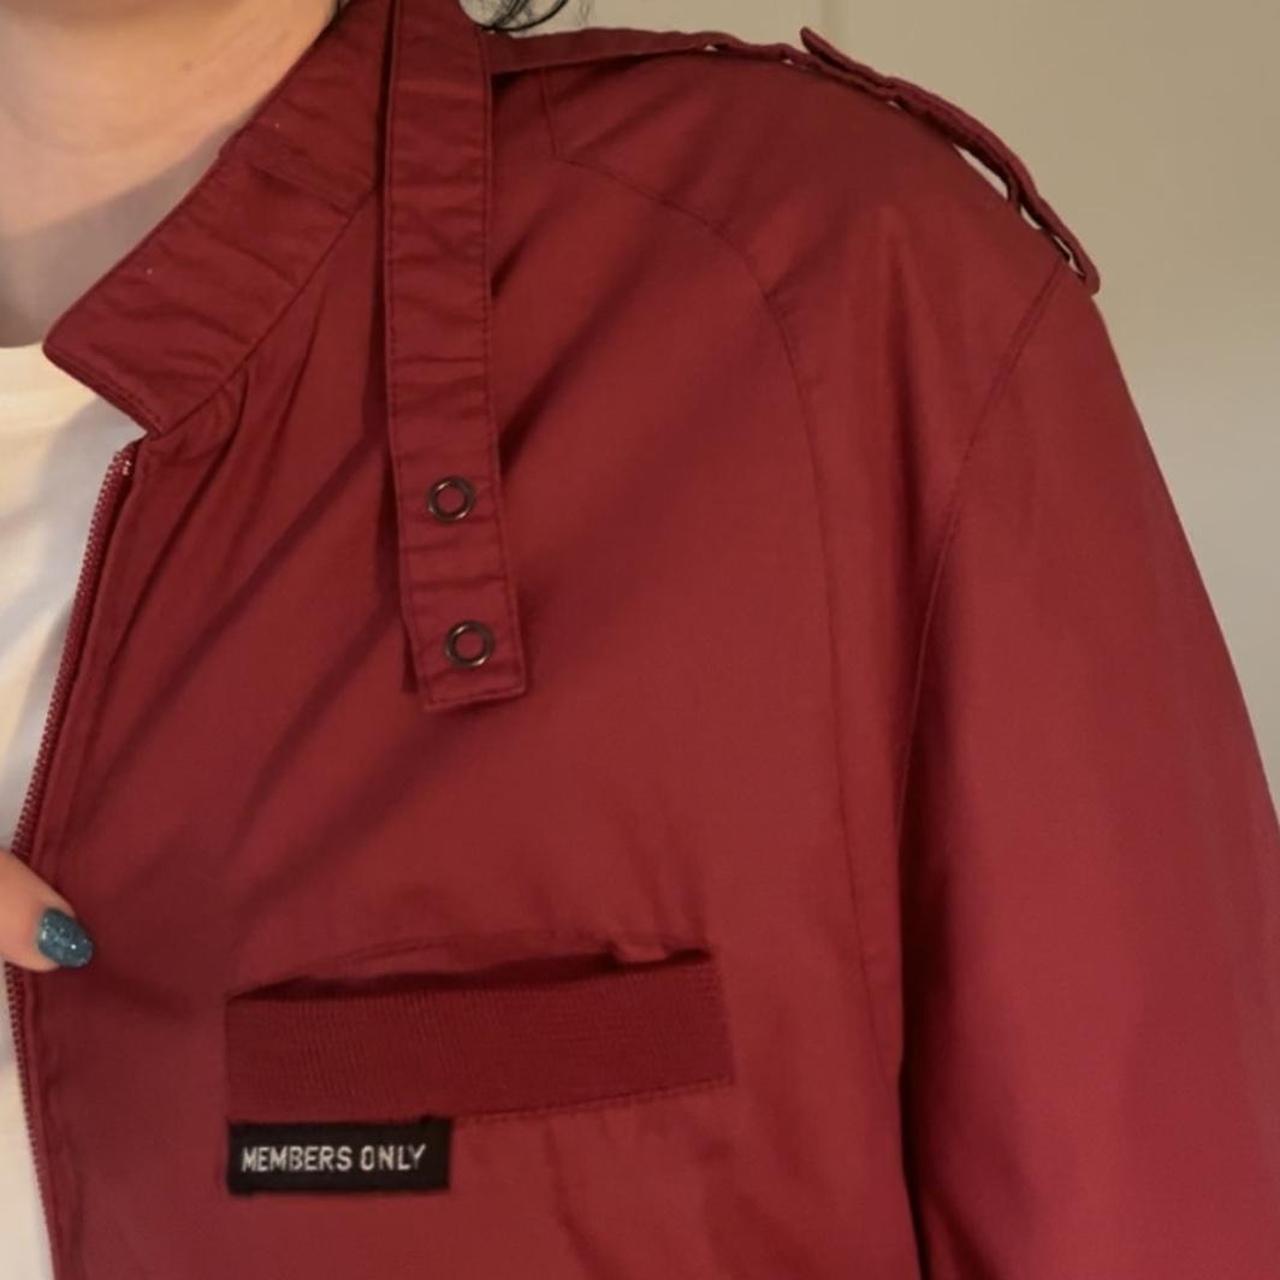 Members Only Women's Burgundy and Red Jacket